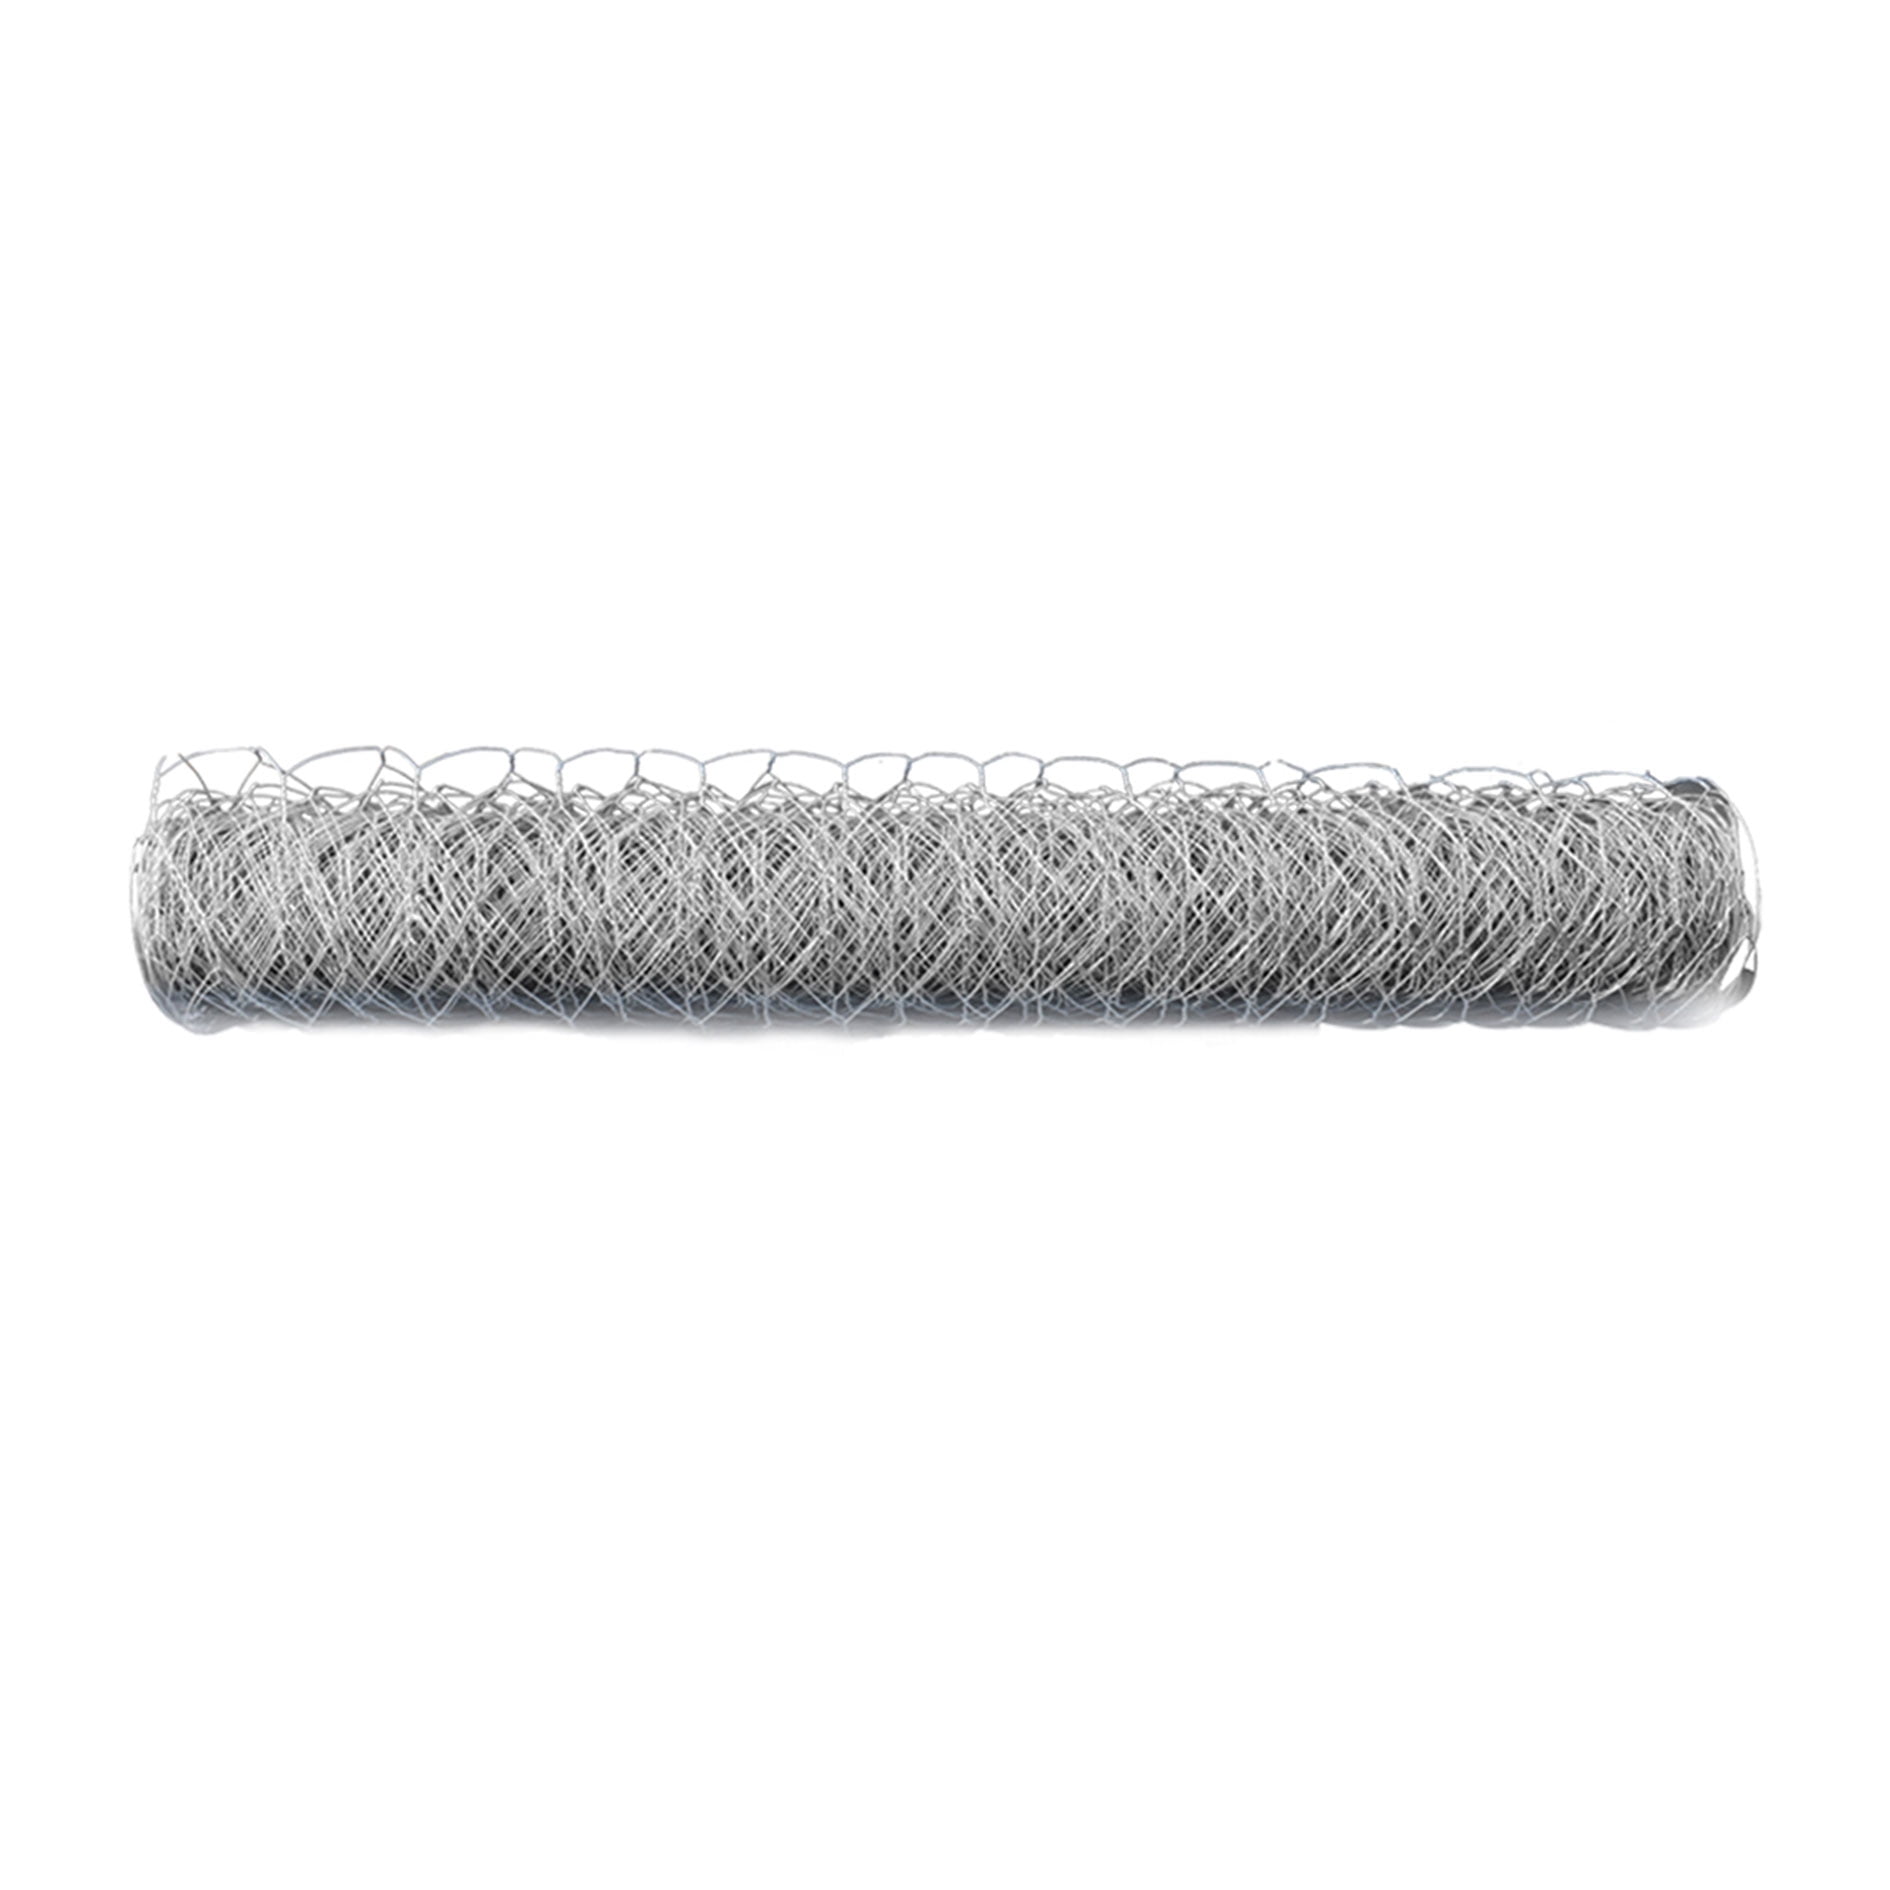 Galvanized Poultry Net Metal Mesh Fencing Chicken Wire 2" Holes 